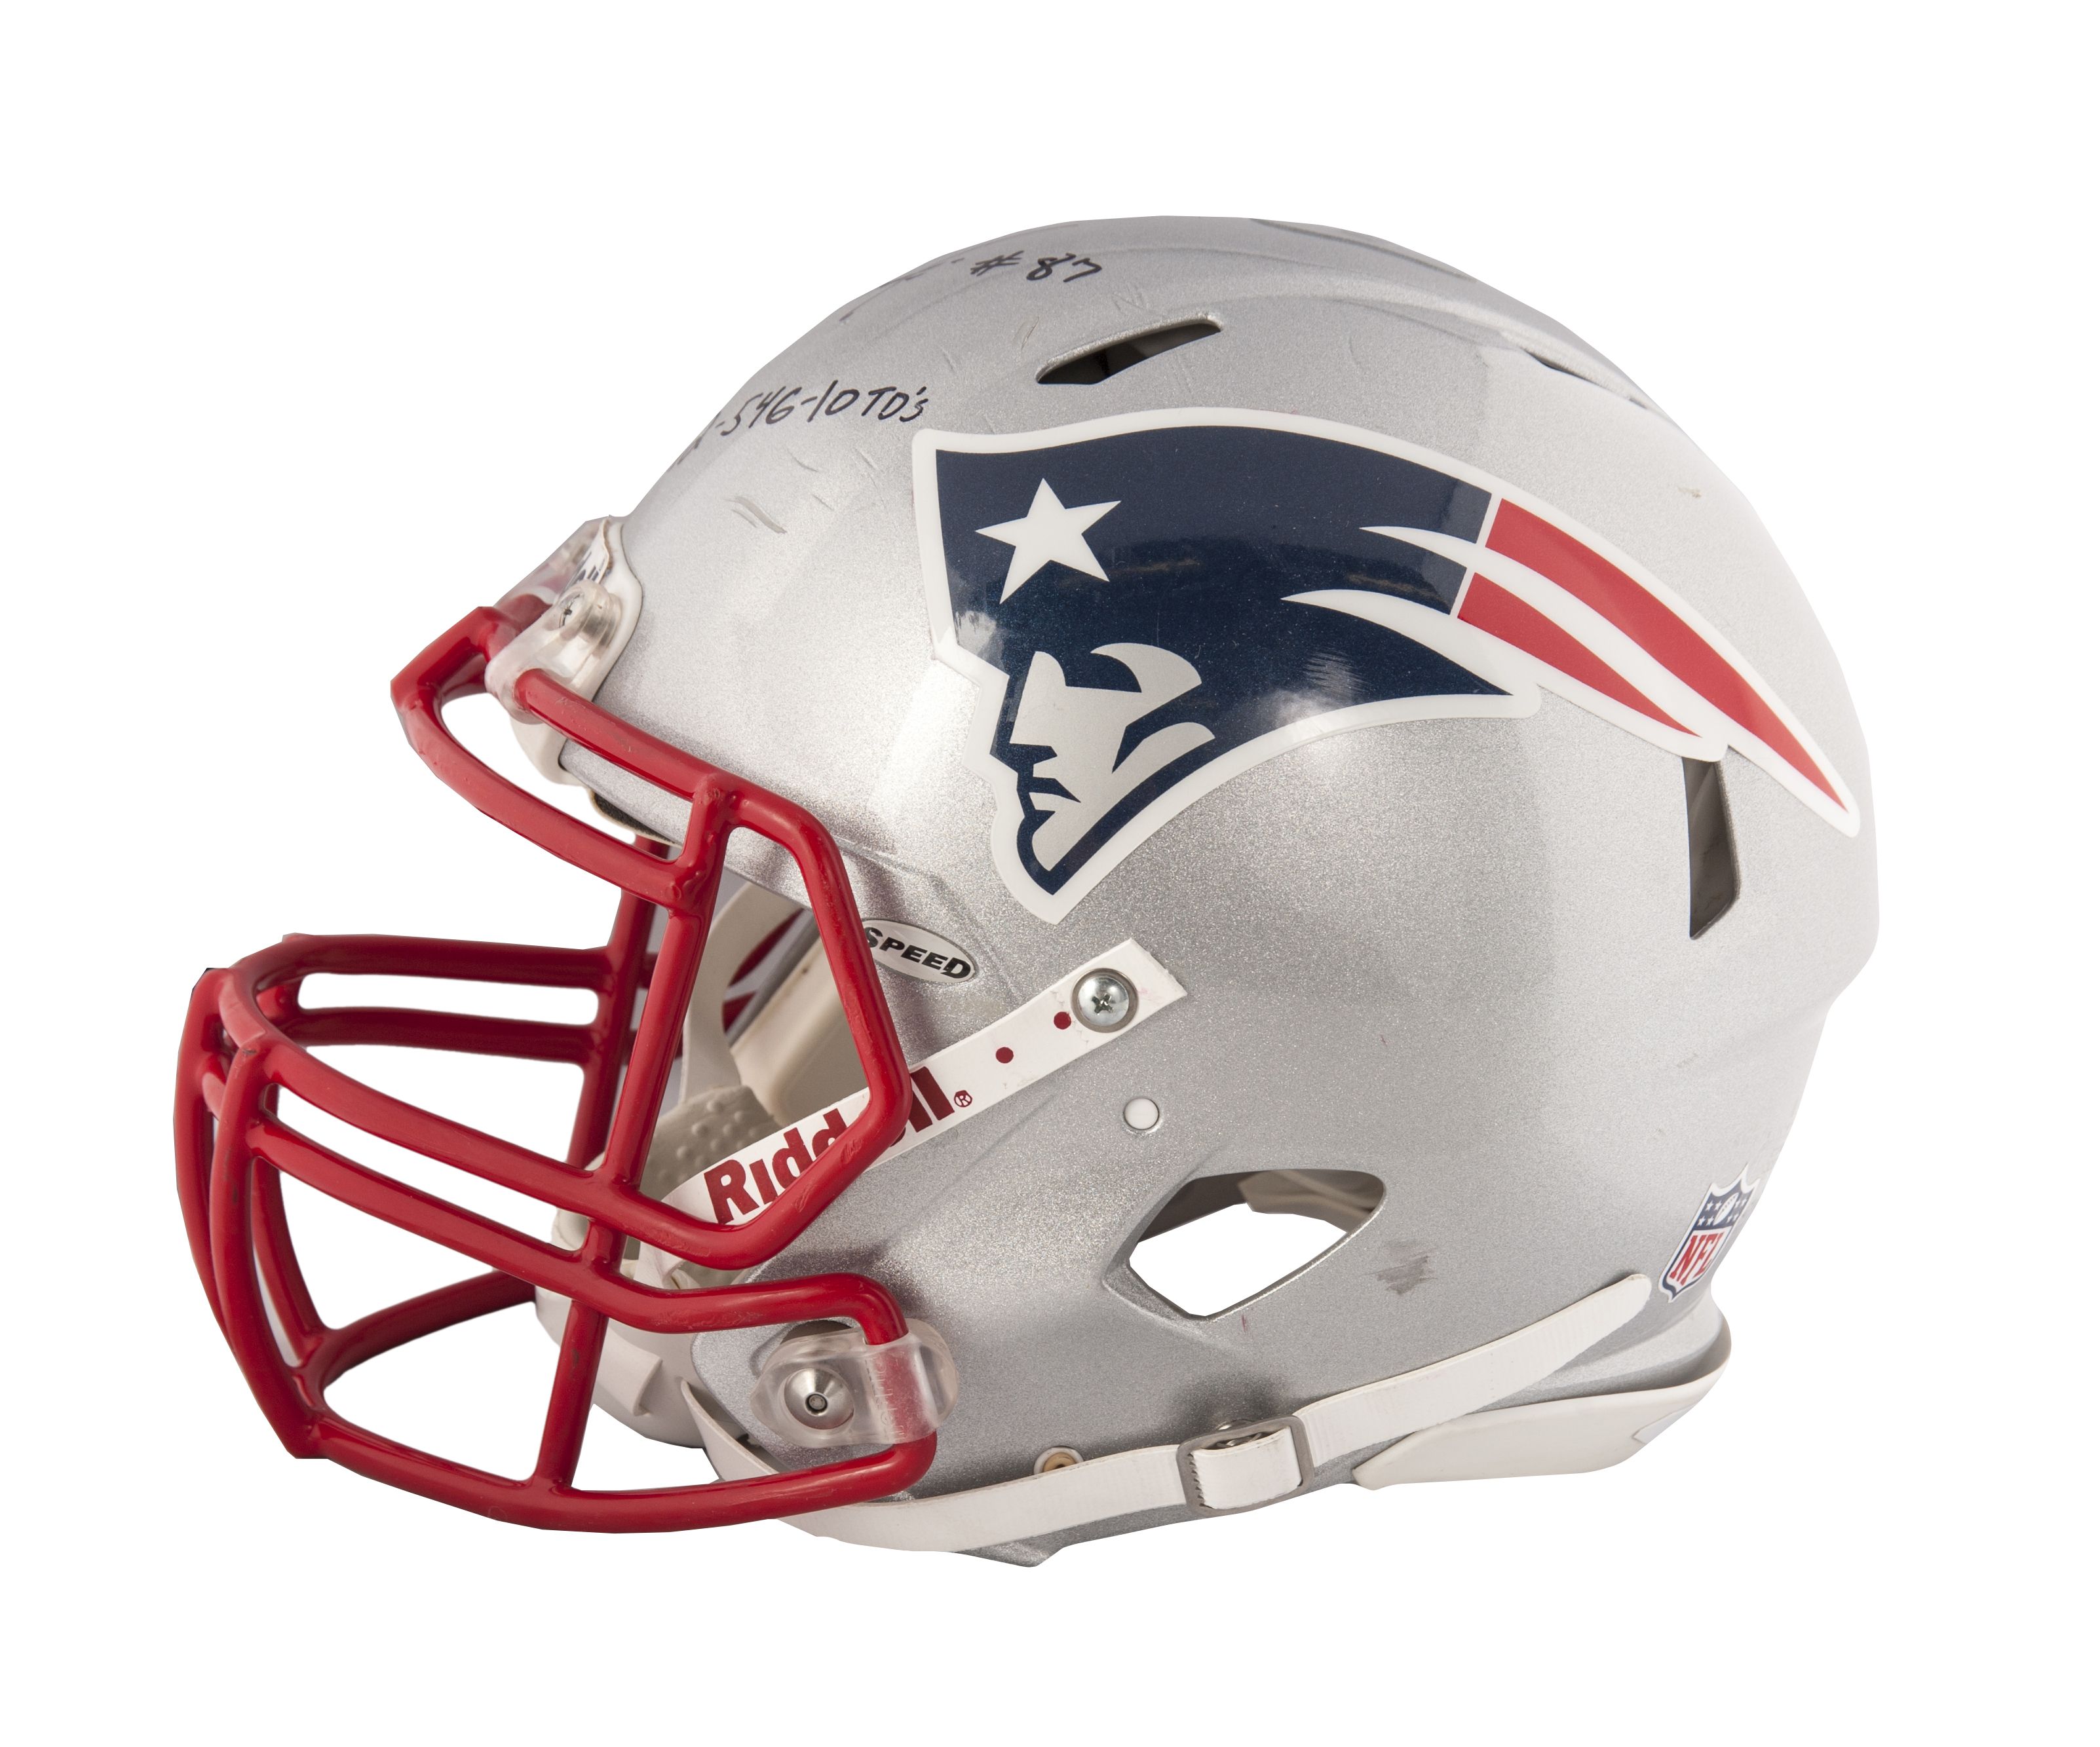 New England Patriots Helm Check Out These Awesome NFL Helmet Design